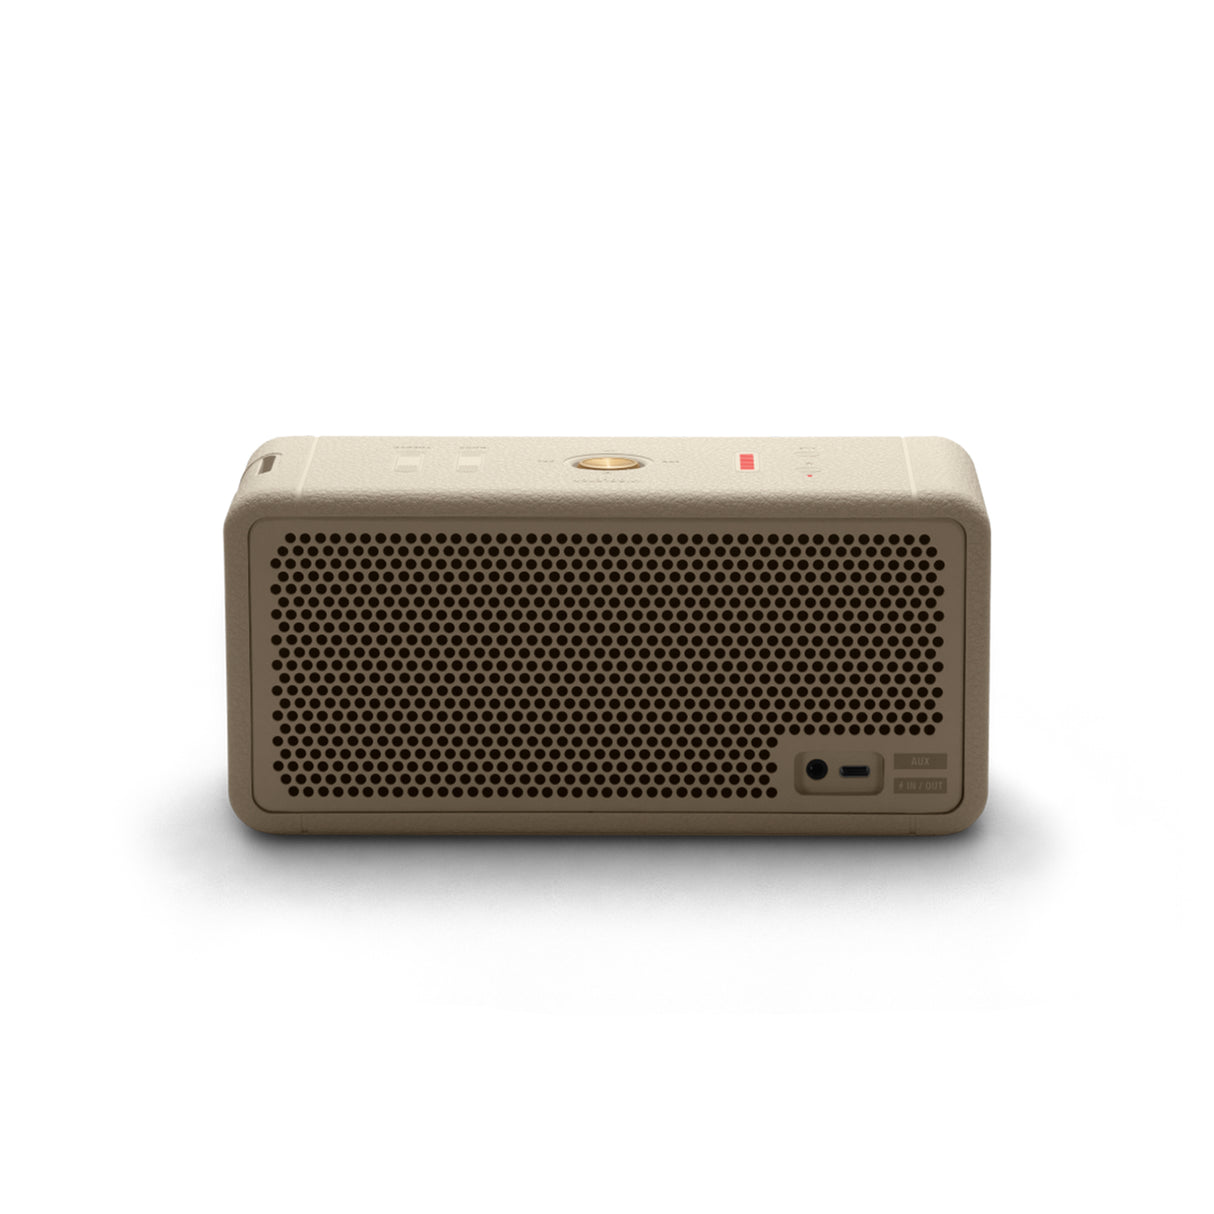 Marshall Middleton test: our full review - Bluetooth speakers